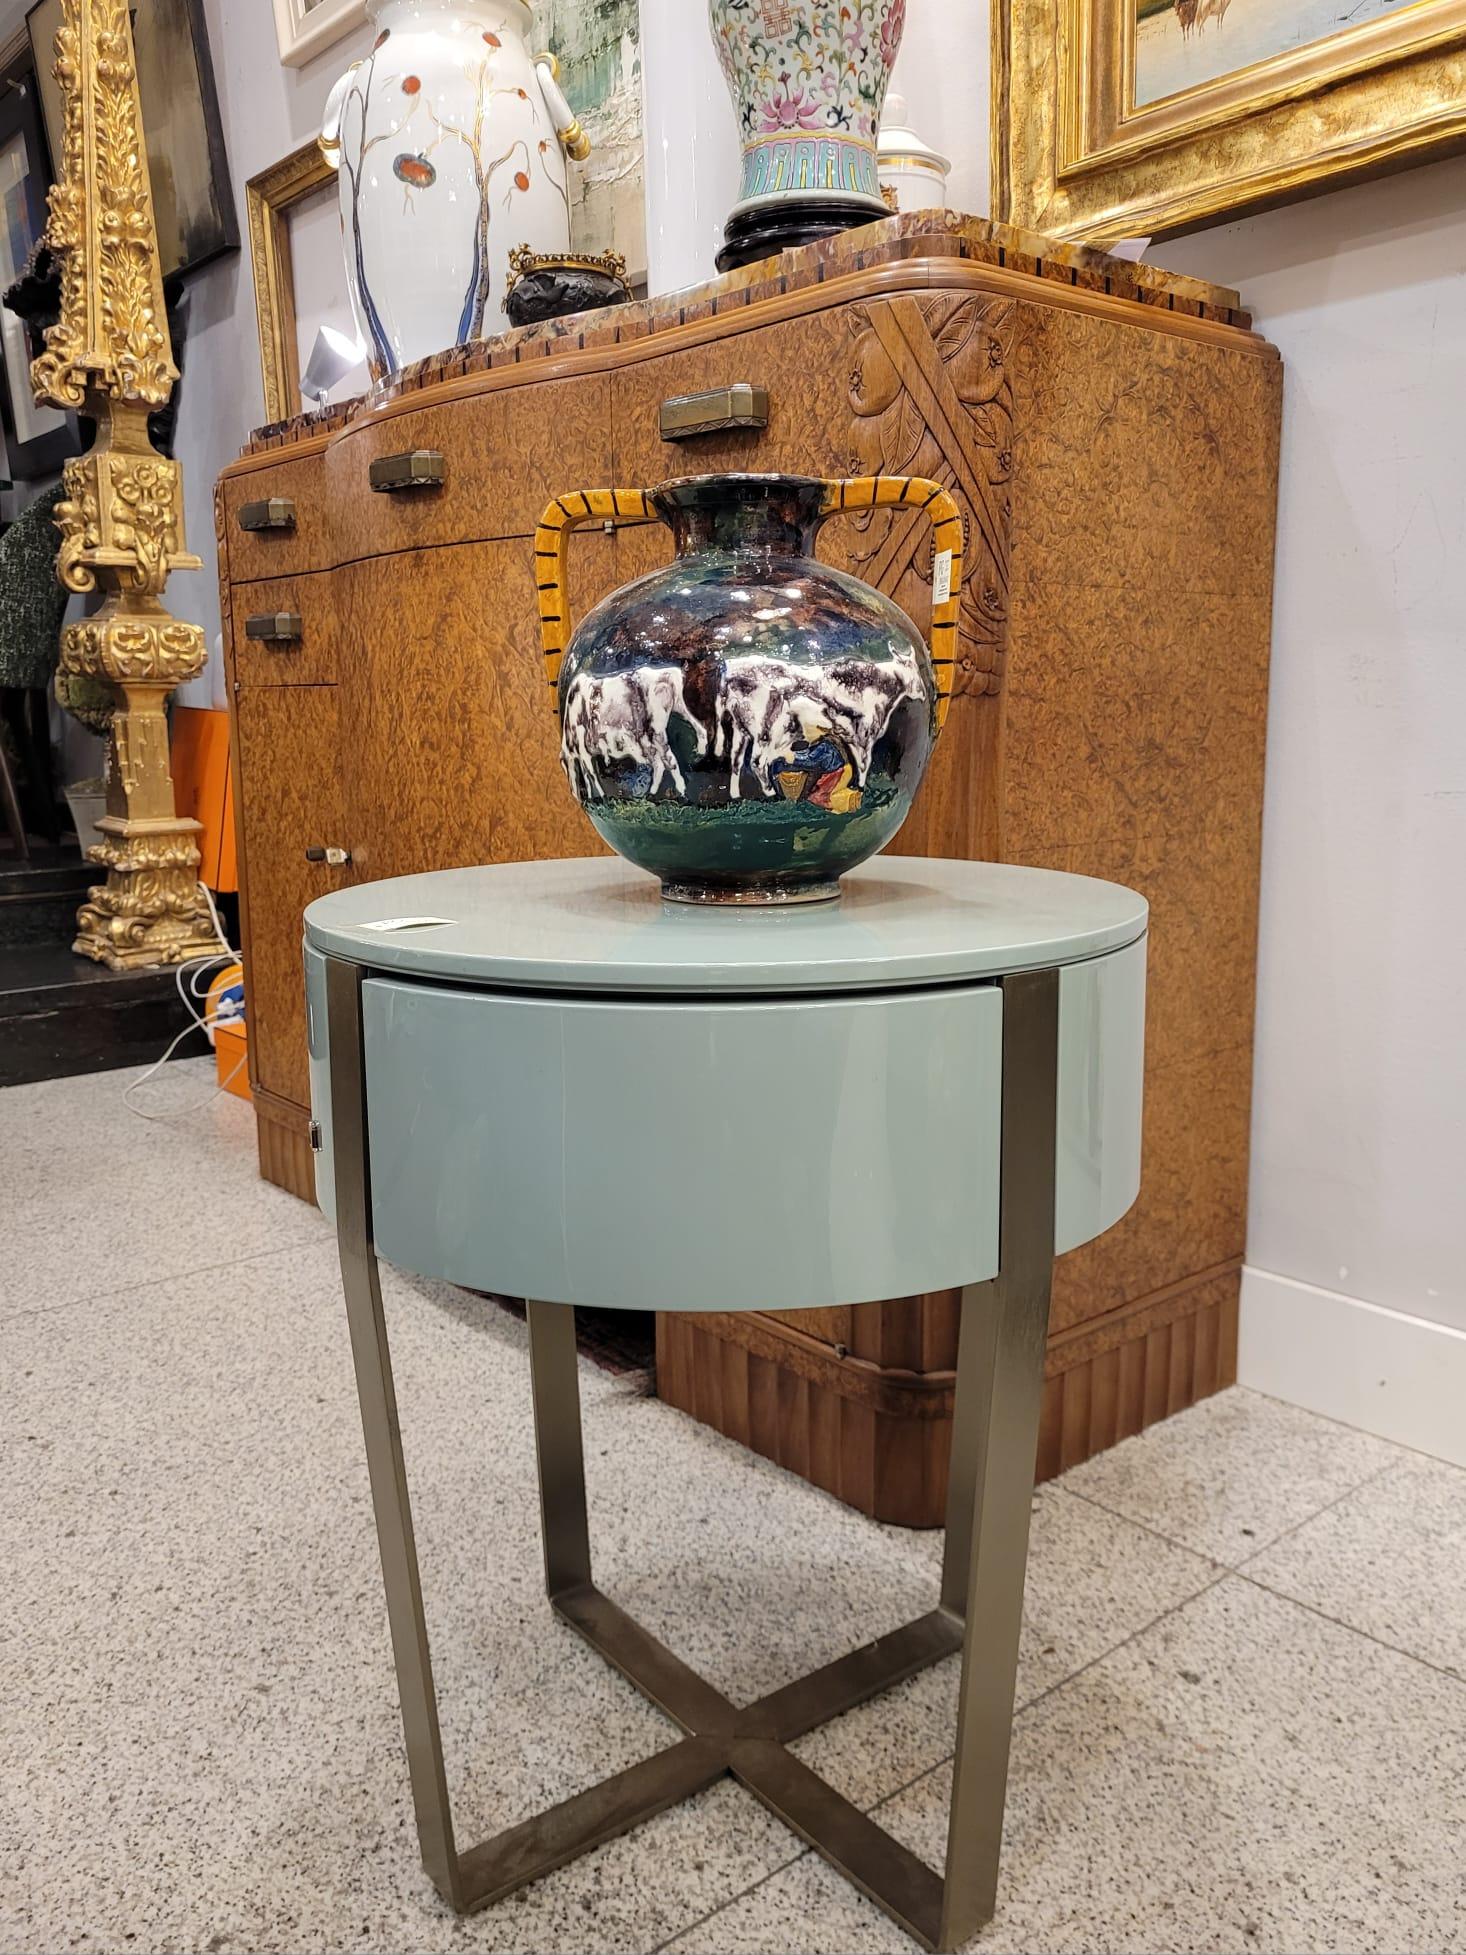 Natuzzi Italian Green Sidetable in Glossy Celadon Colour, One Drawer 11